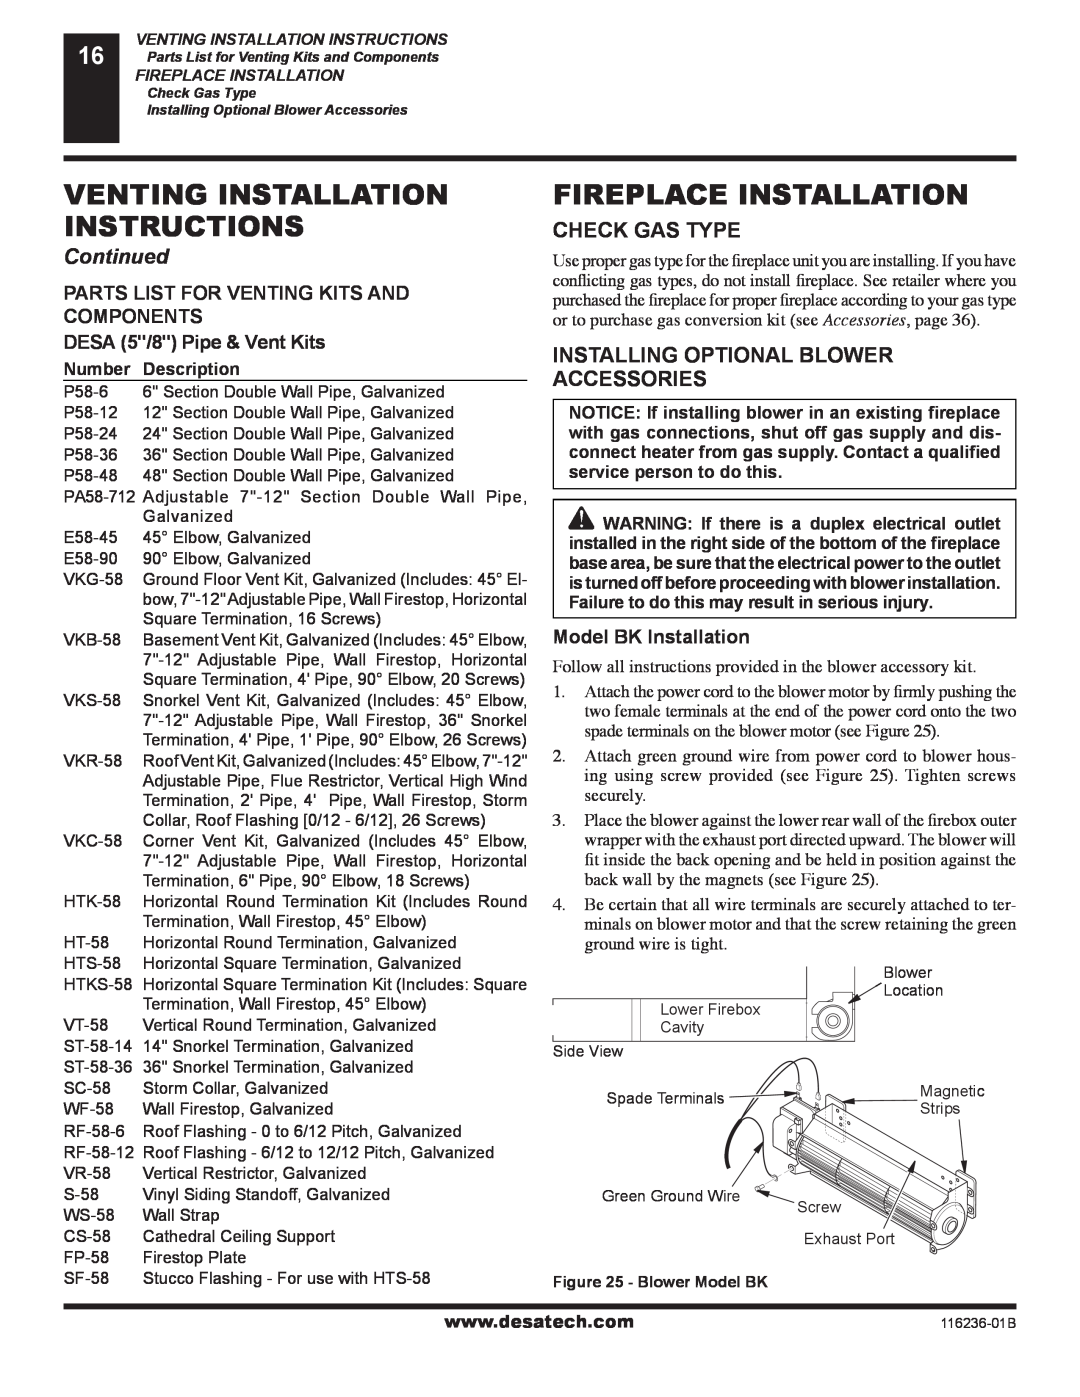 Desa (V)VC42P SERIES Venting Installation, Instructions, Fireplace Installation, Check Gas Type, Components, Continued 